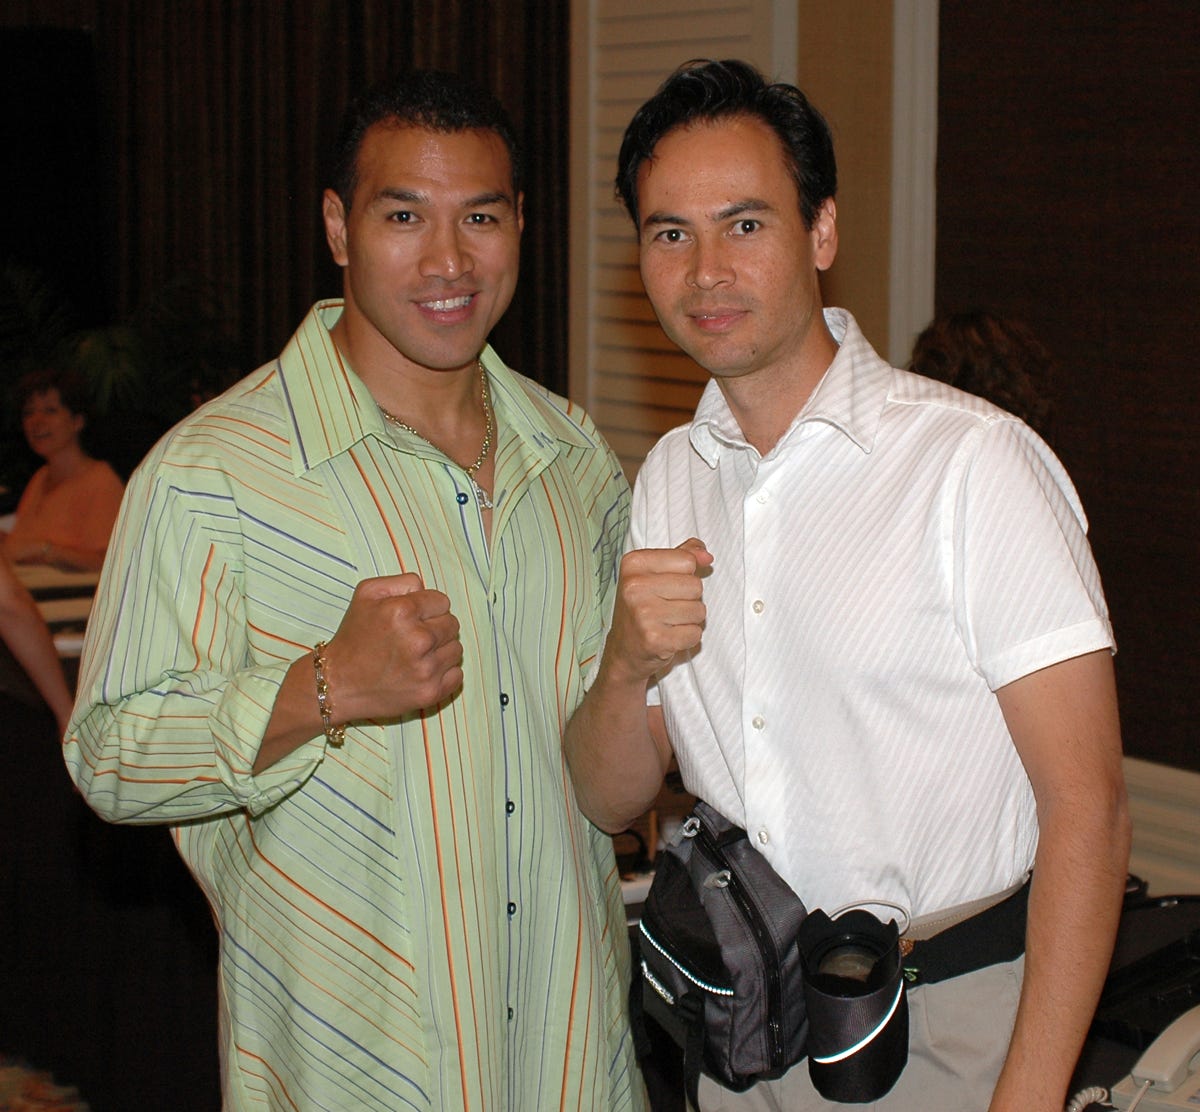 cage fighting and K-1 USA announcer Ray Sefo